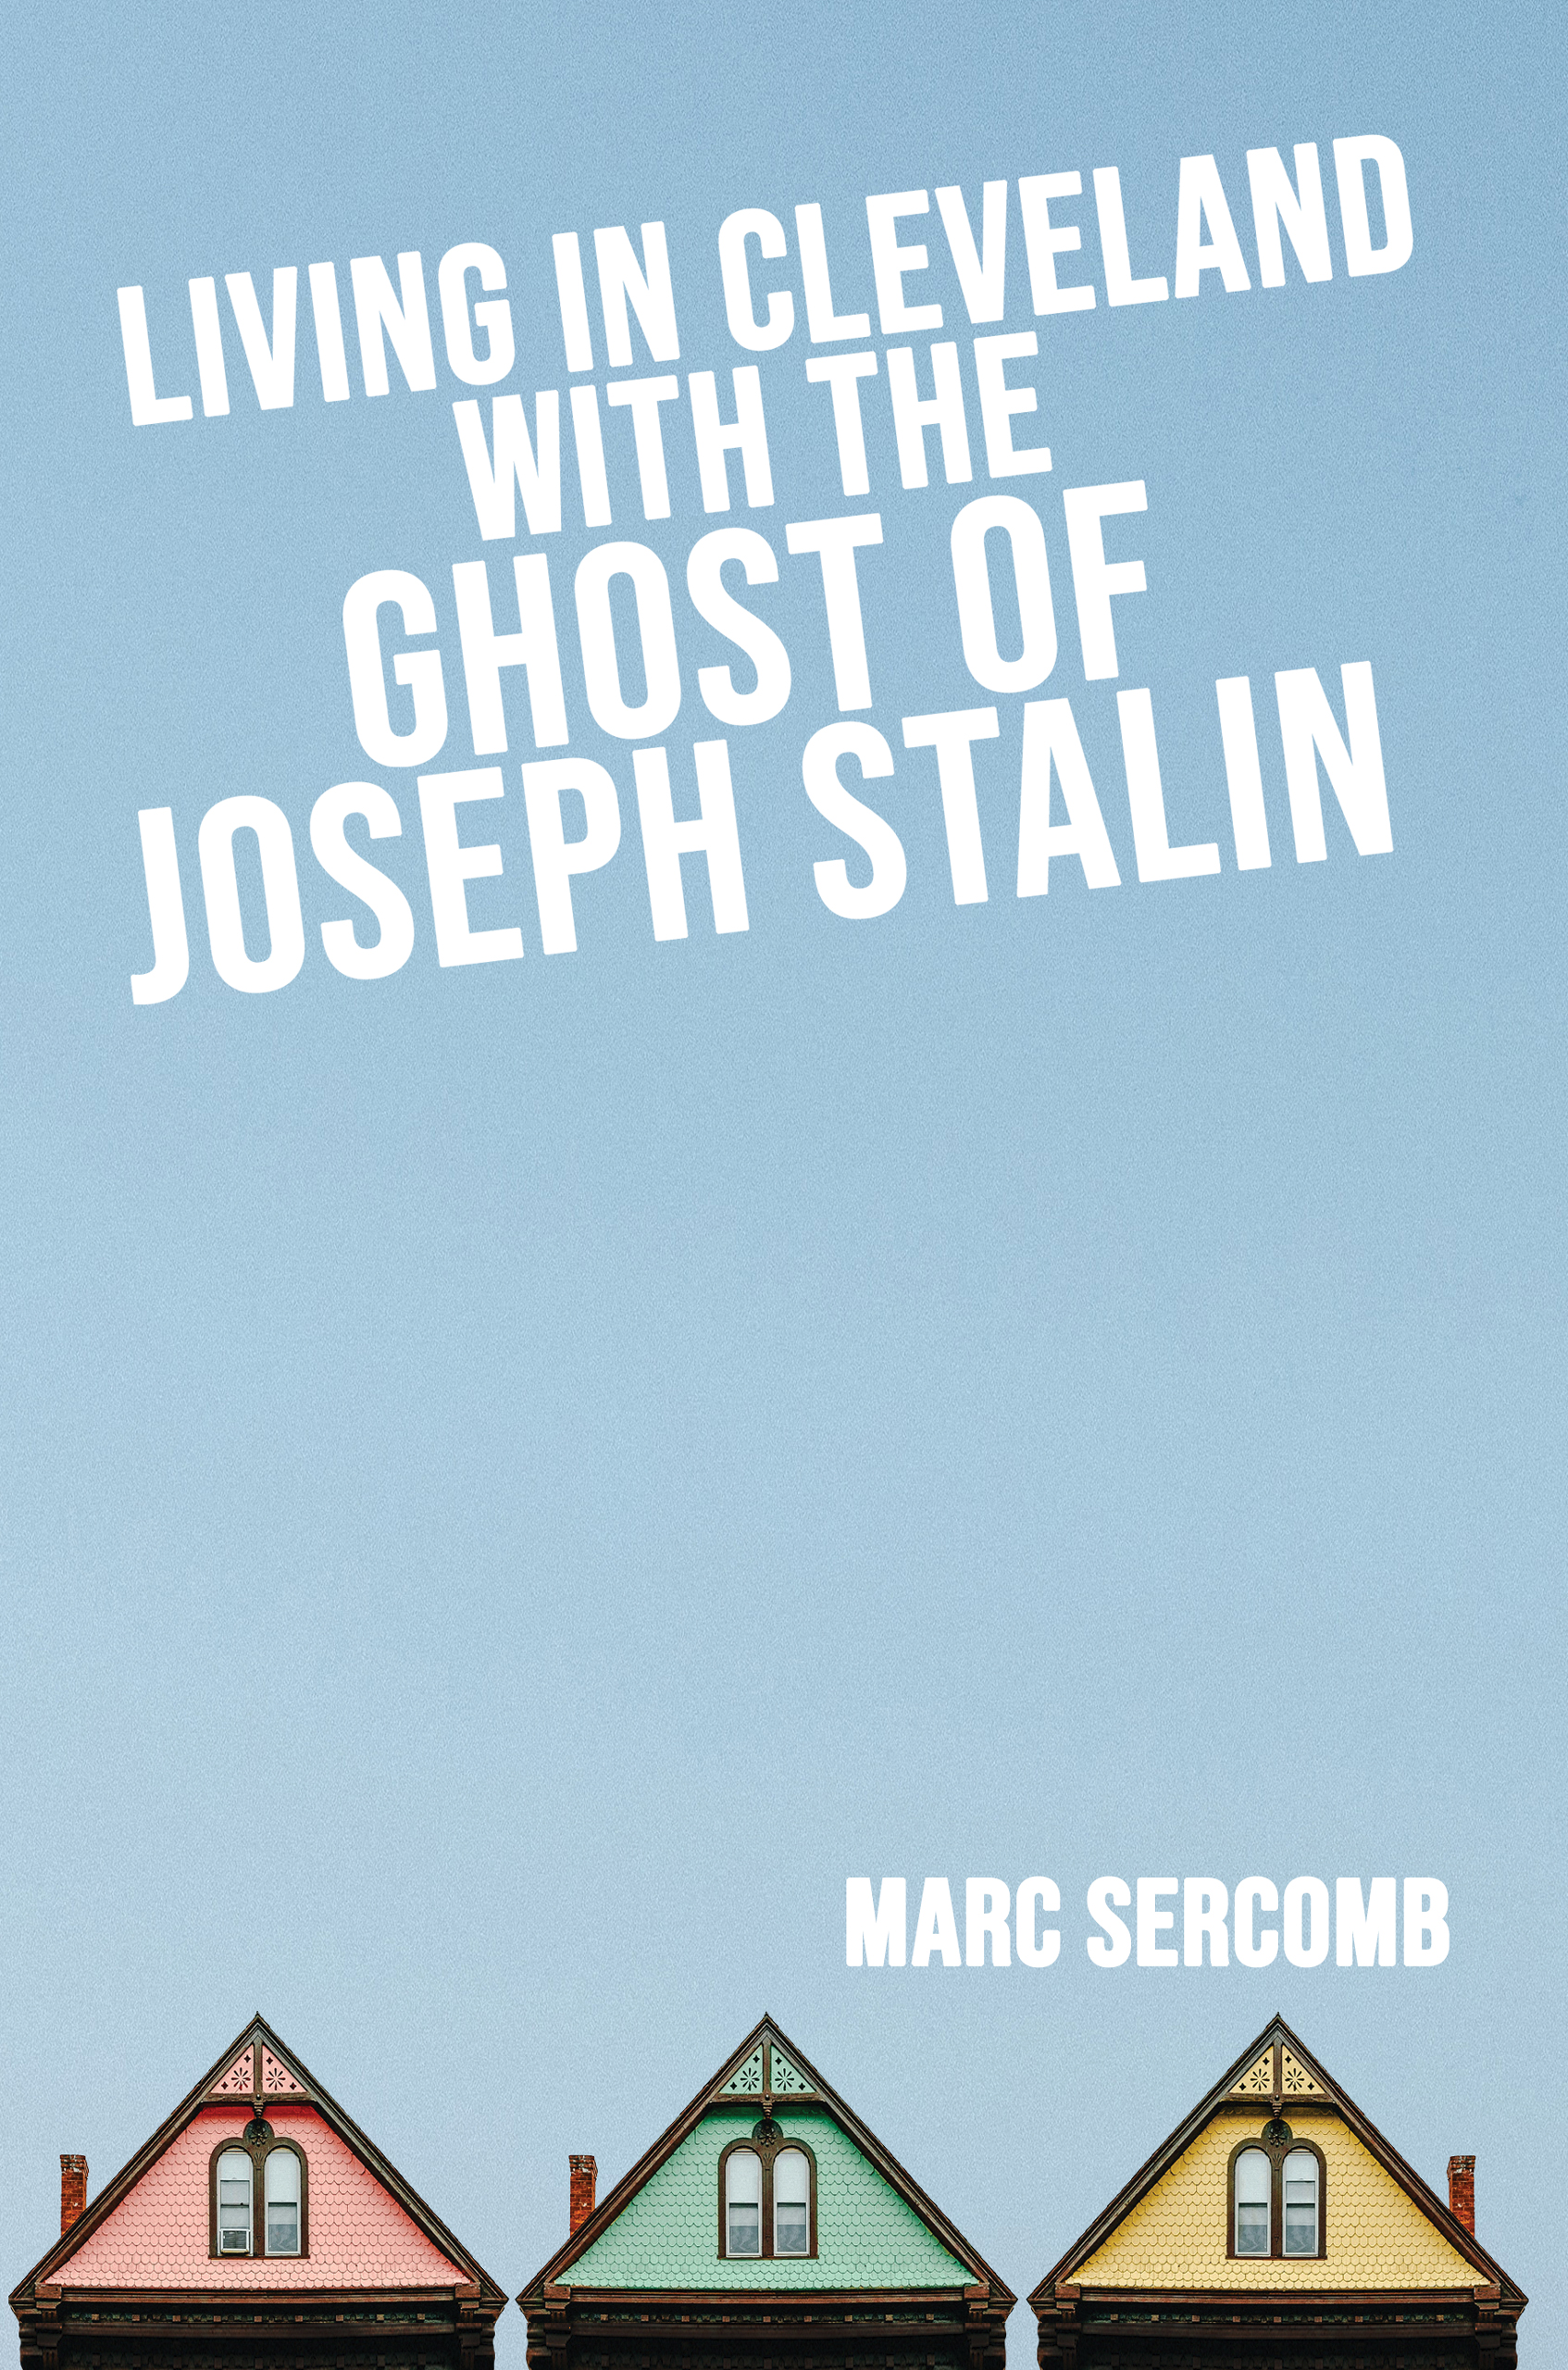 Living in Cleveland with the Ghost of Joseph Stalin by Marc Sercomb